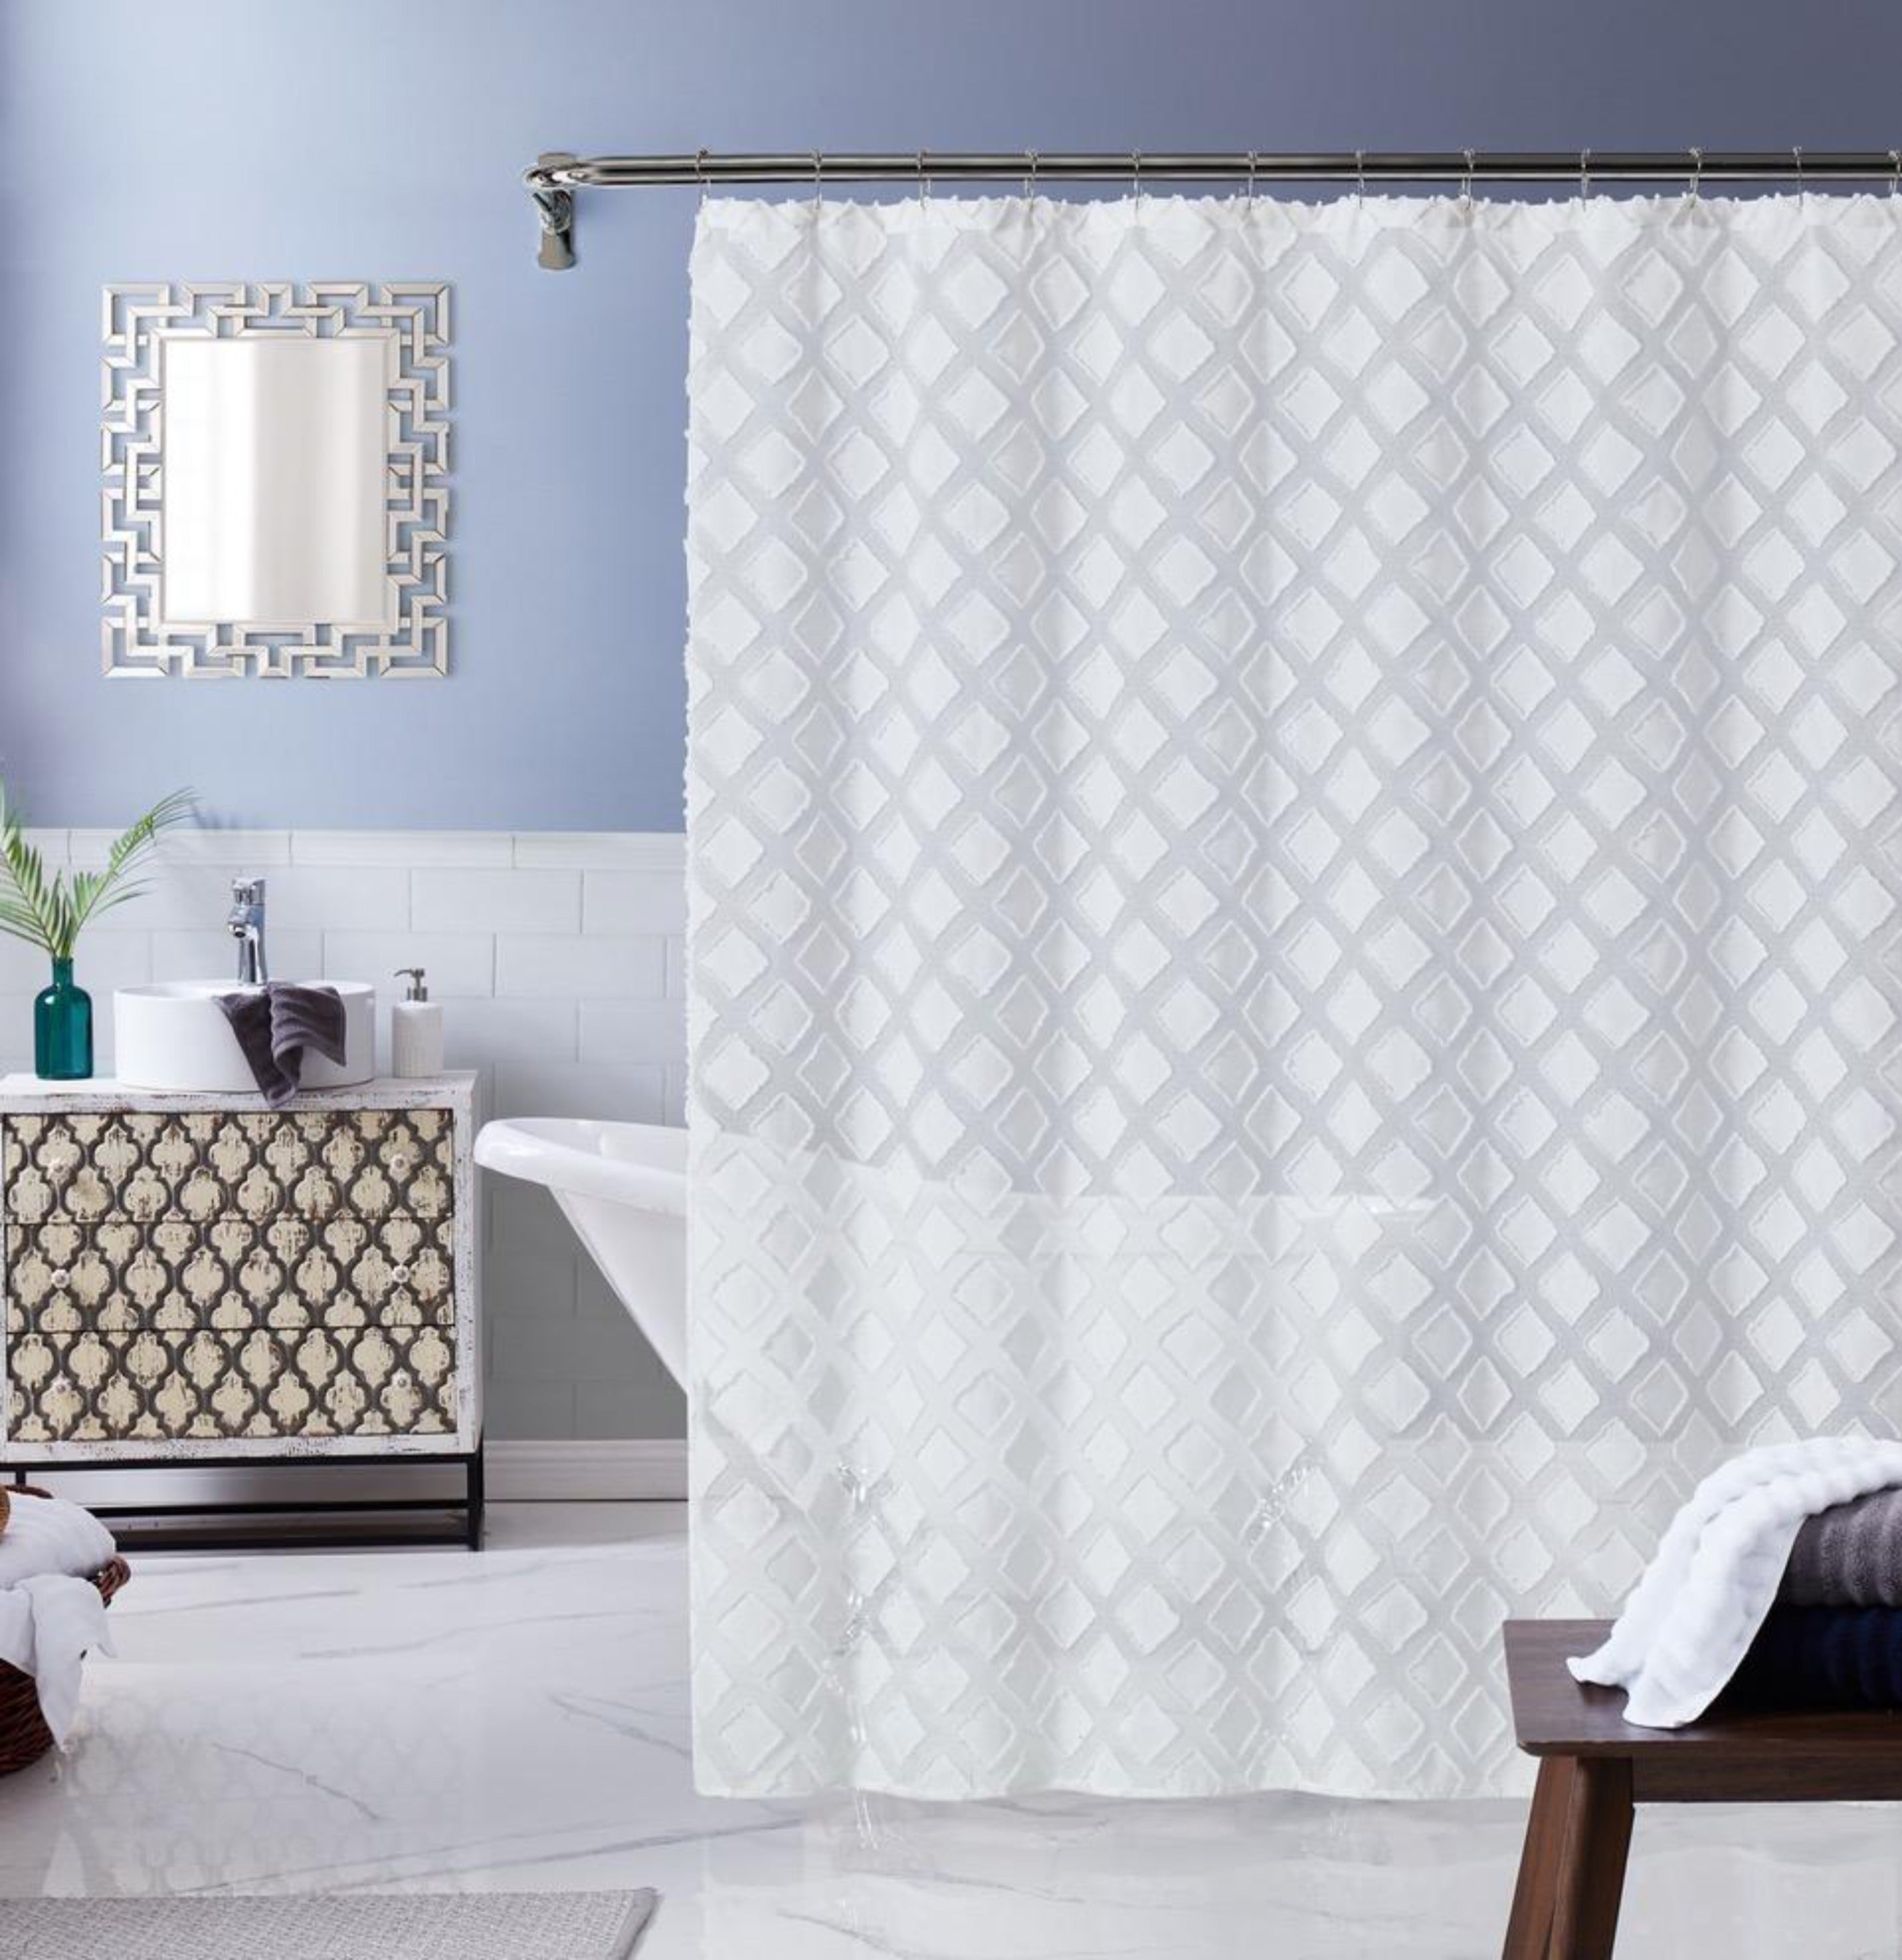 Dainty Home Katie Modern 3D Diamond Textured Embroidered Designed Linen-Look Fabric Shower Curtain